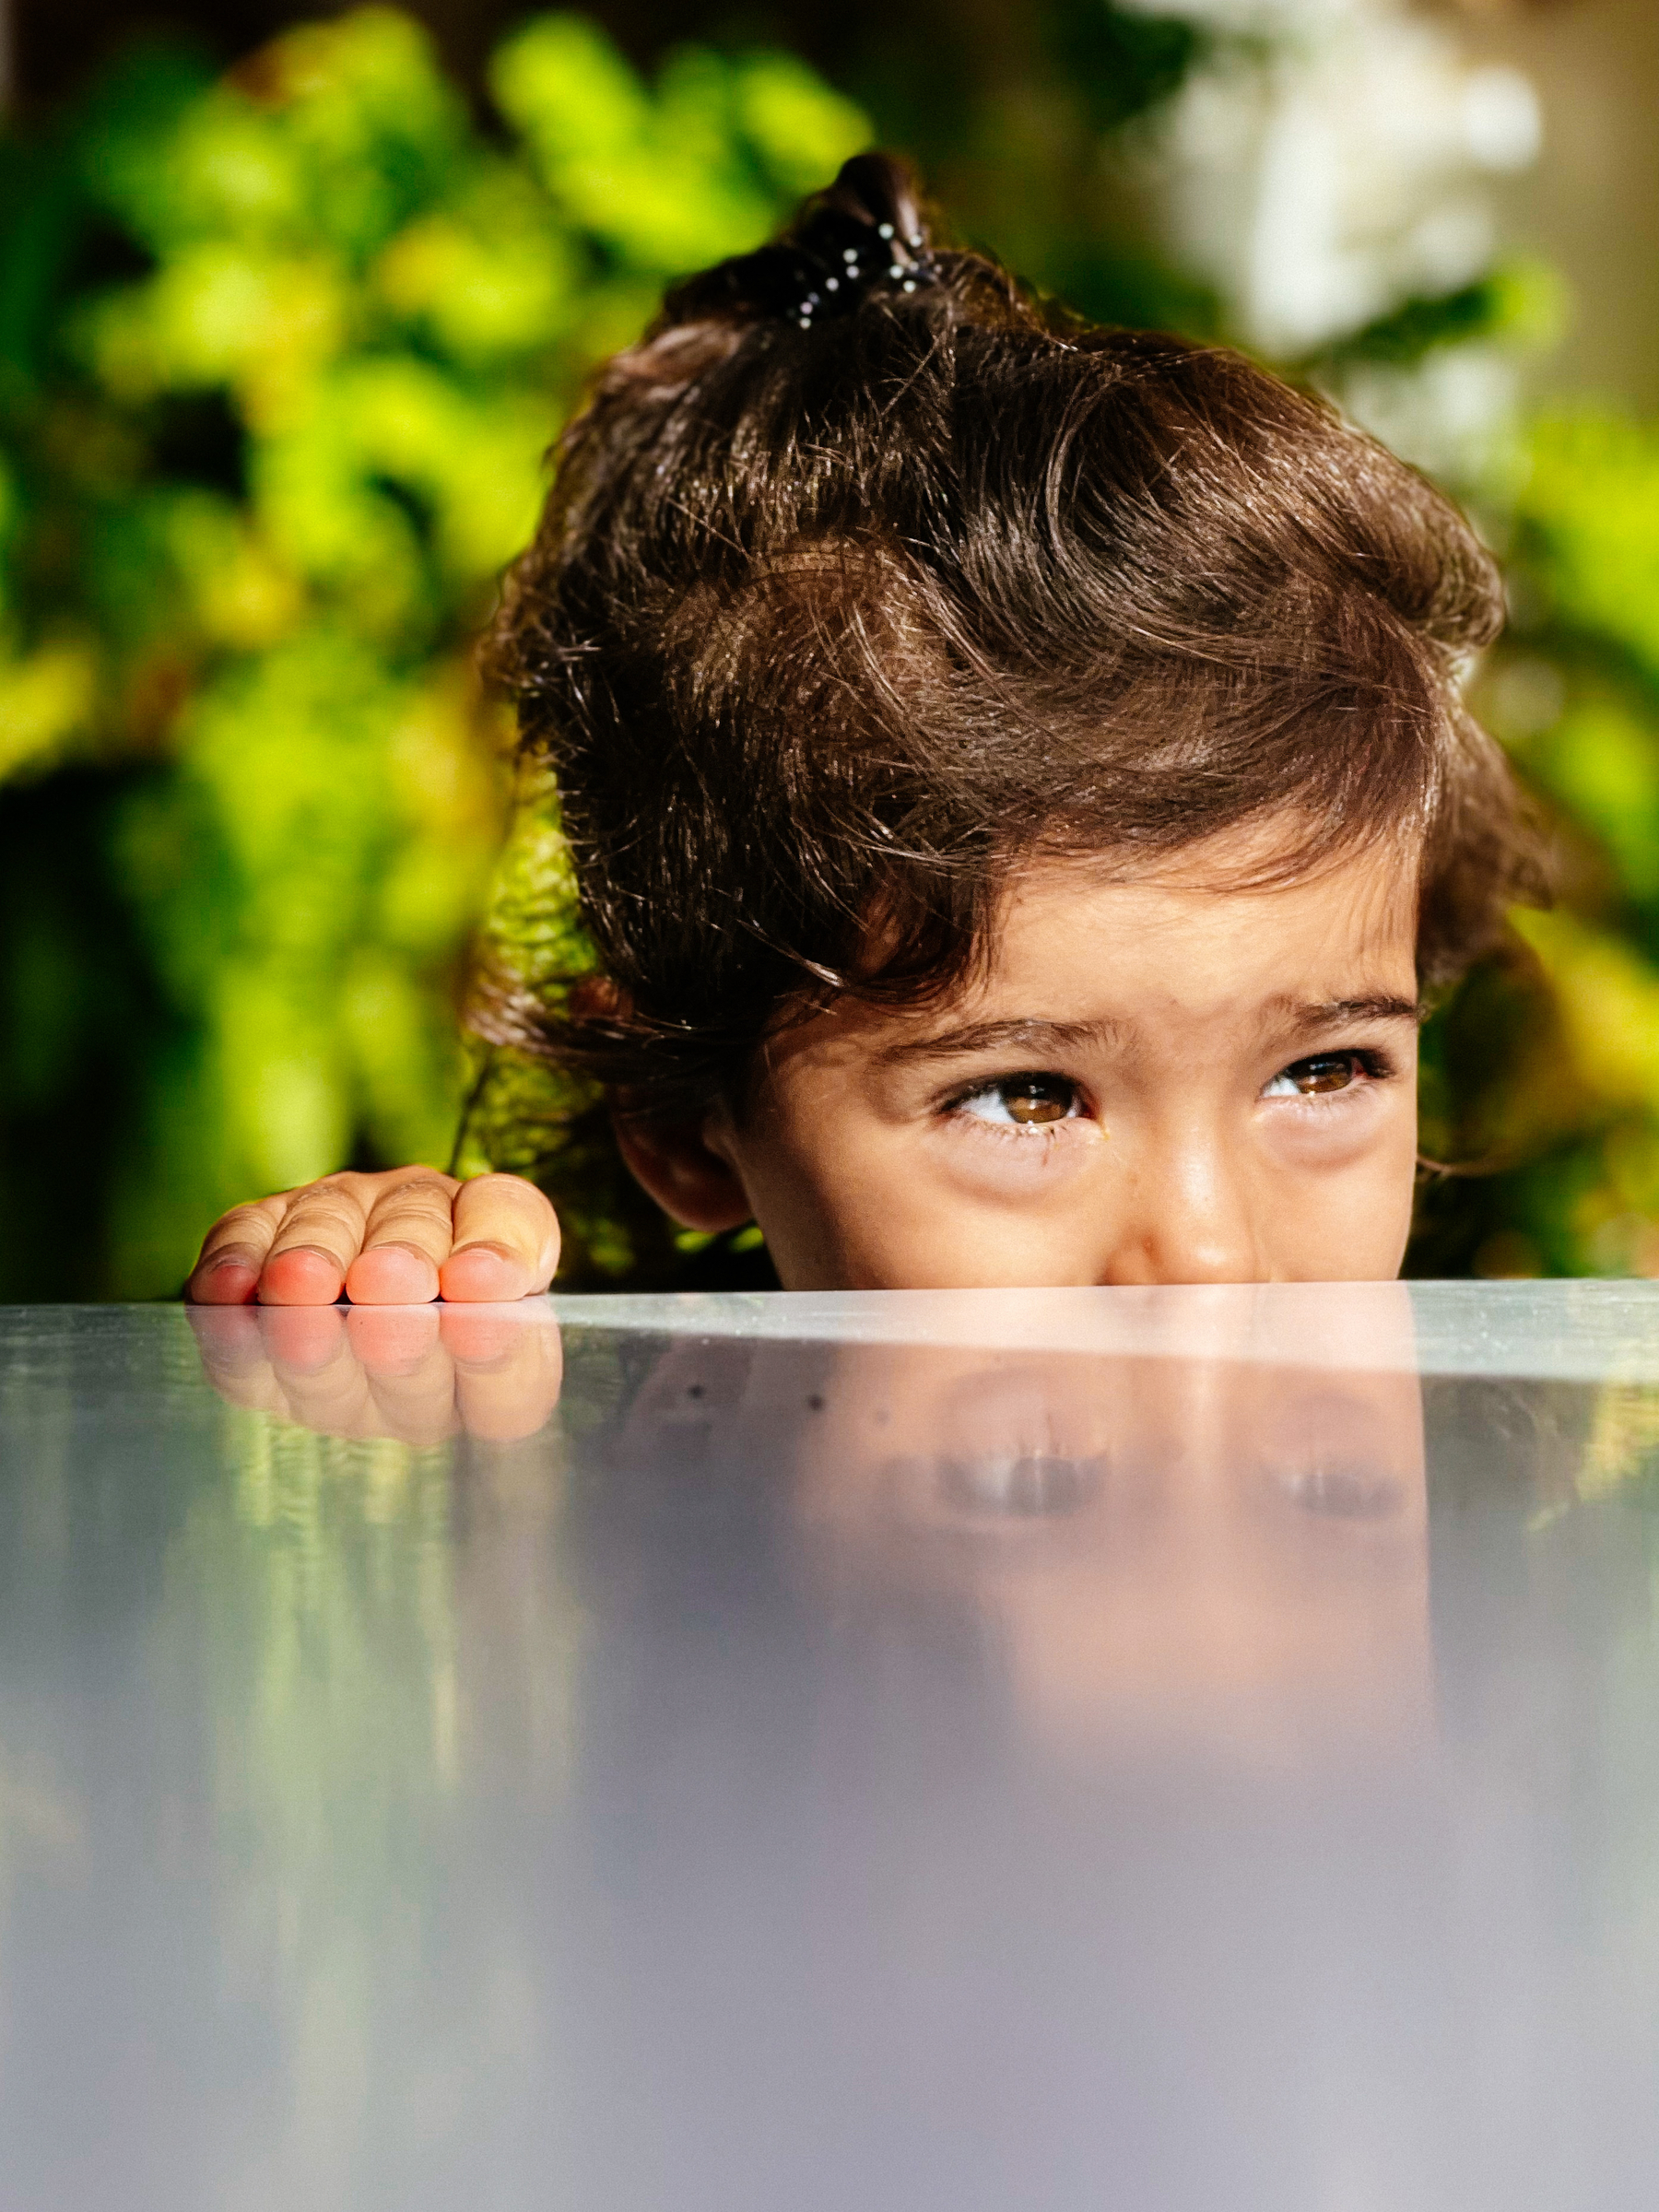 a toddler looks out from behind a table